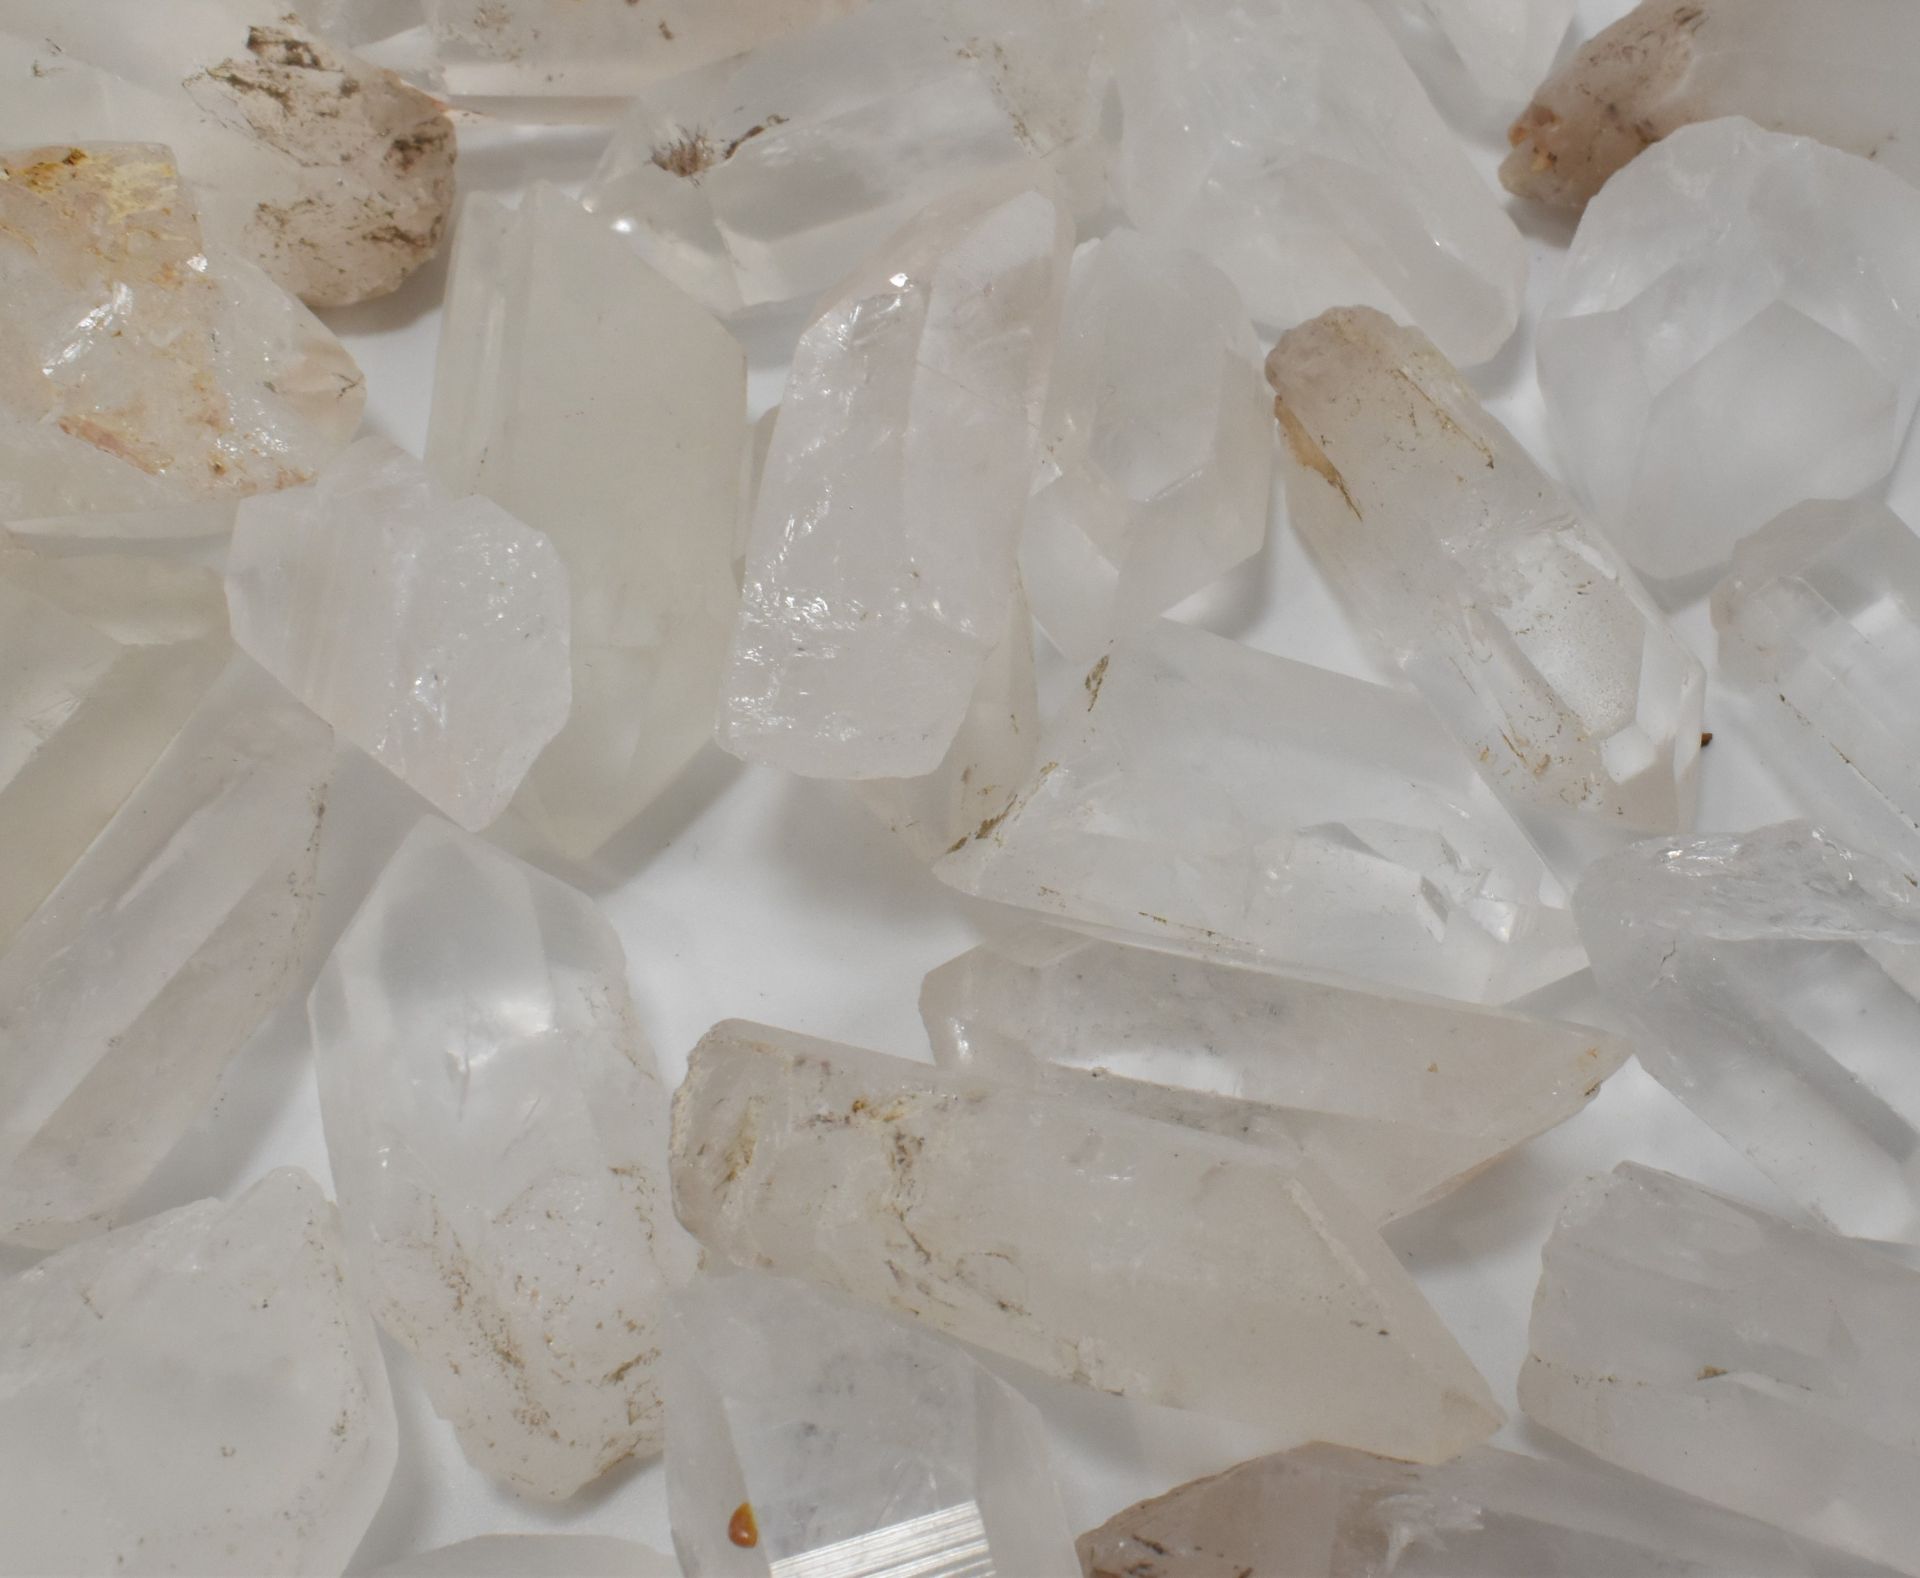 MINERAL SPECIMENS - COLLECTION OF QUARTZ POINTS - Image 4 of 4